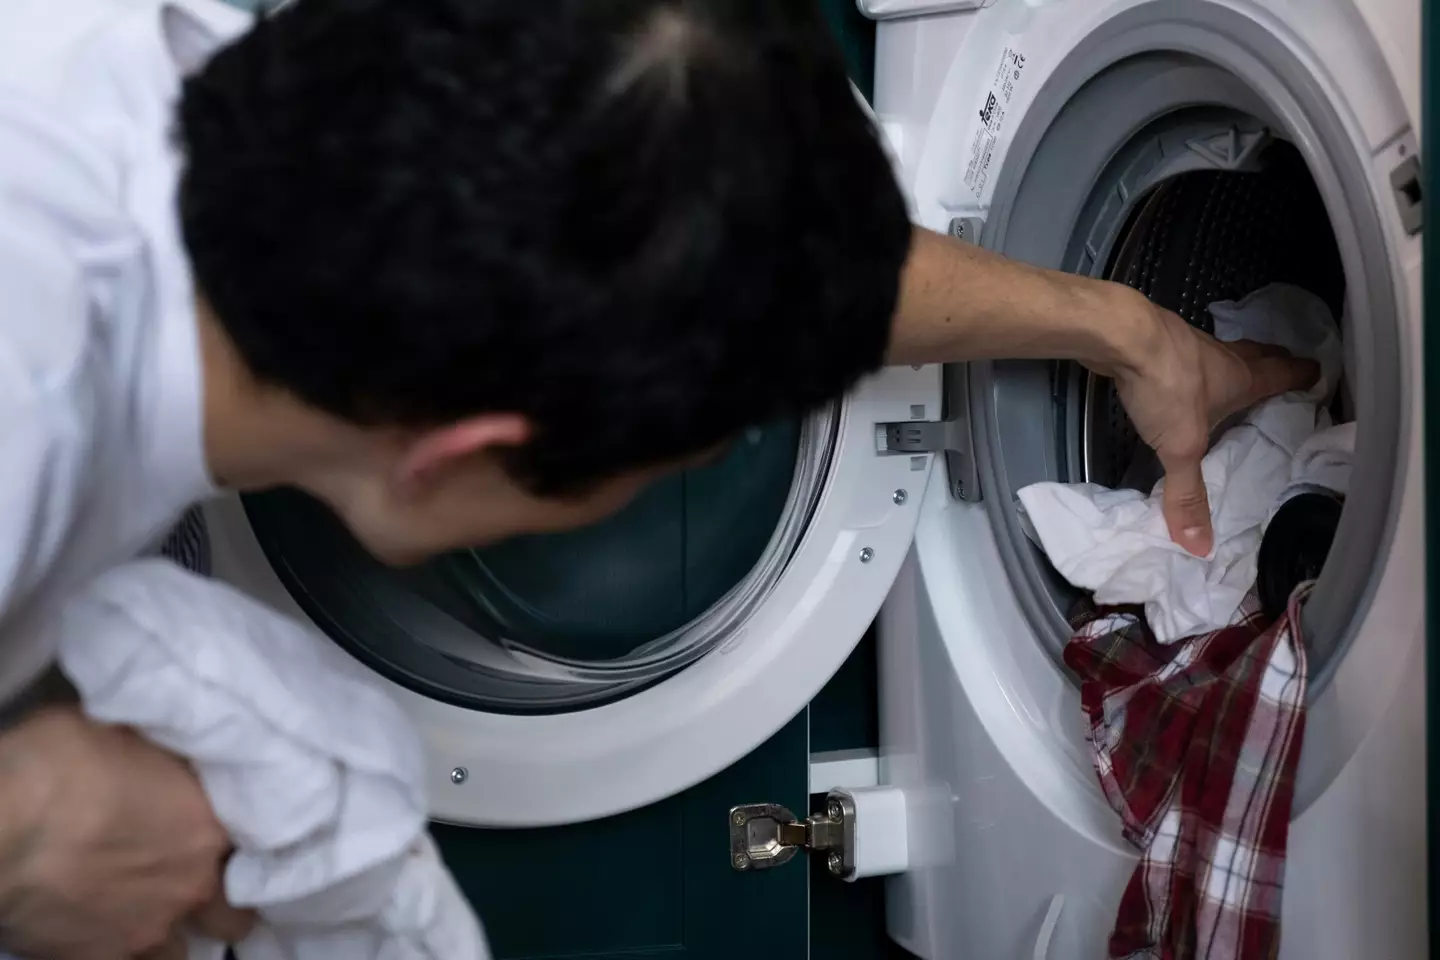 Brits may be washing their clothes incorrectly.